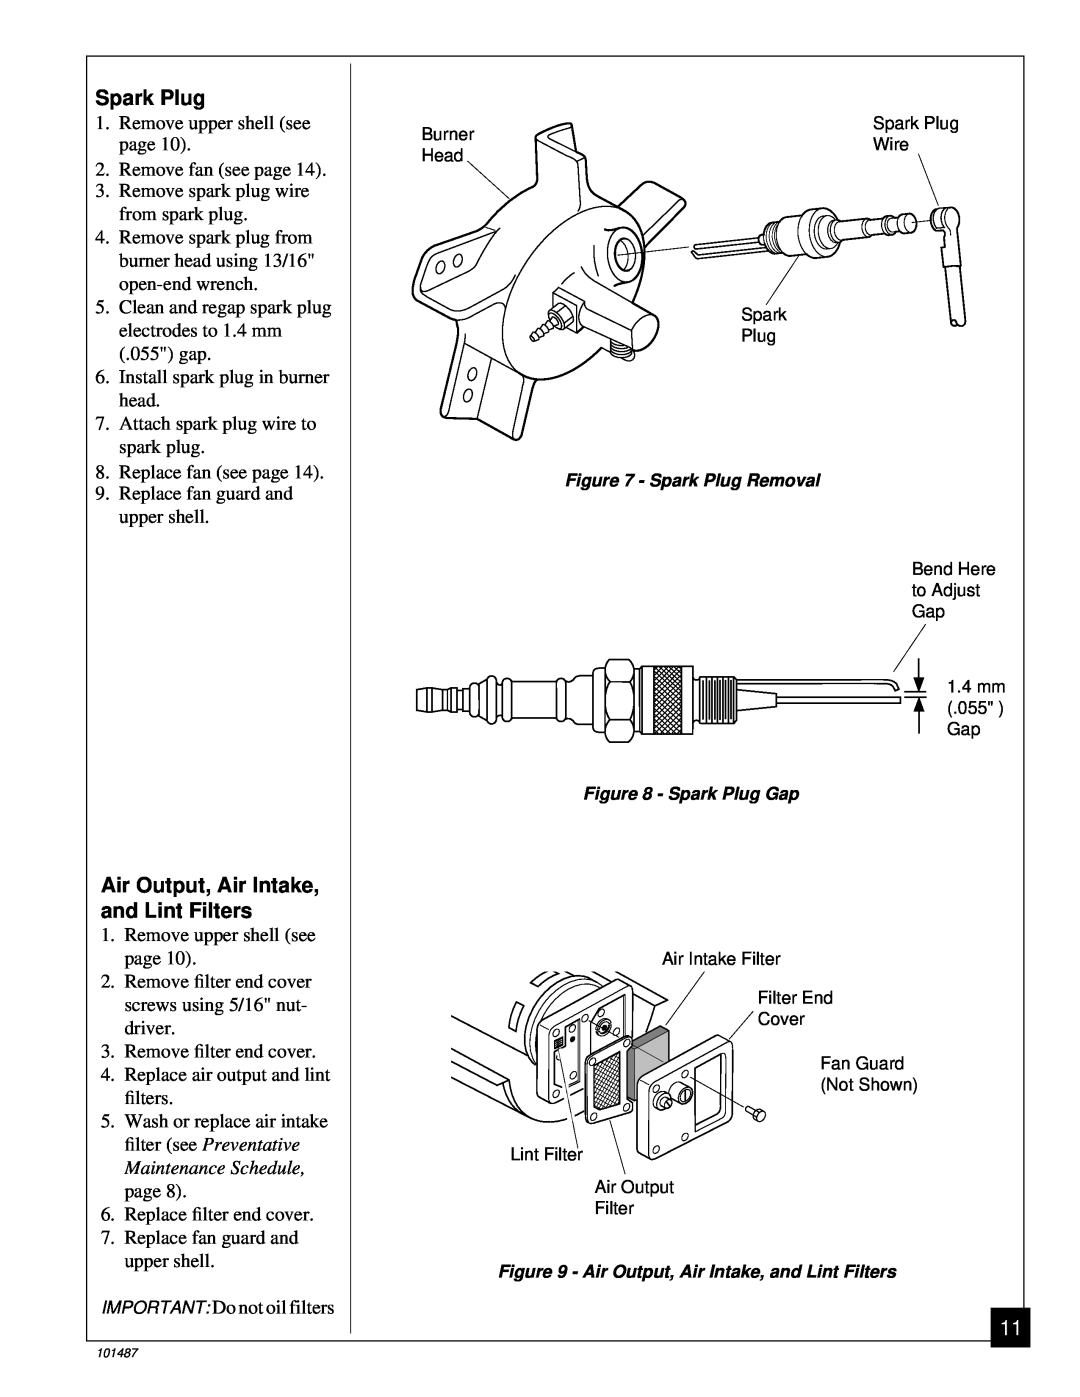 Master Lock BH150CE owner manual Spark Plug, Air Output, Air Intake, and Lint Filters 